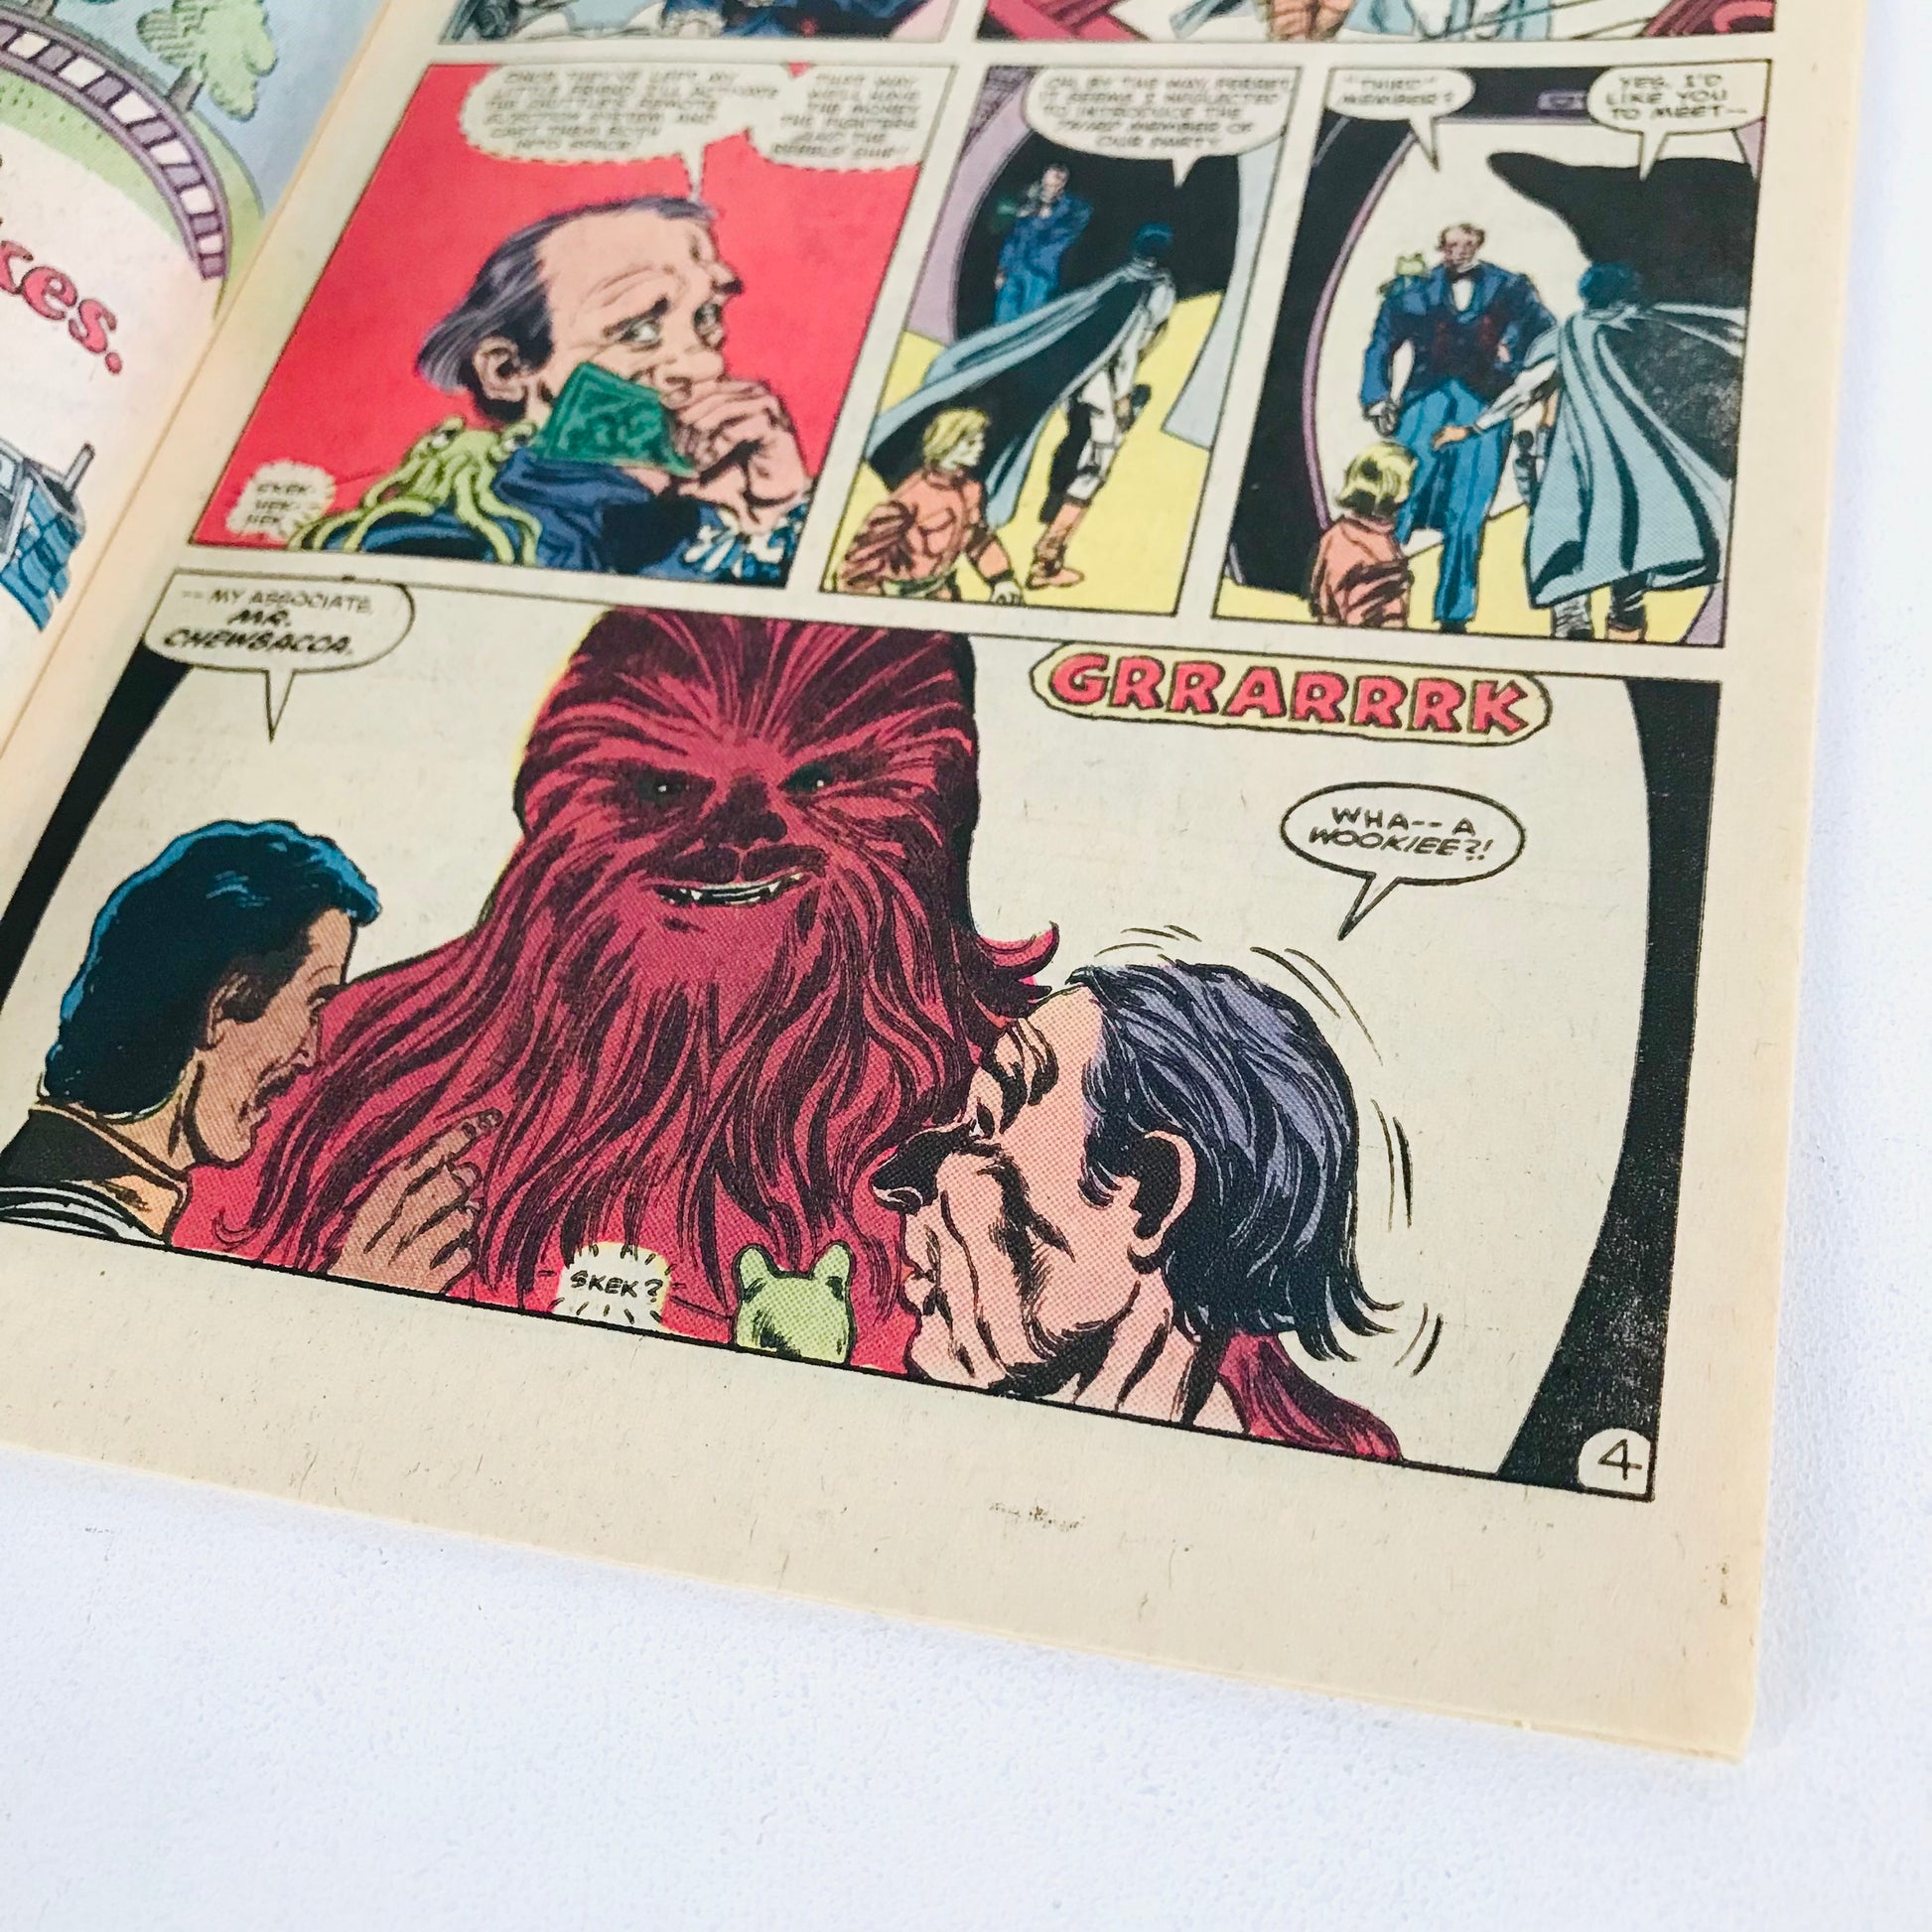 A comic book panel with Chewbacca making a sound spelled out as "GRRARRRK".